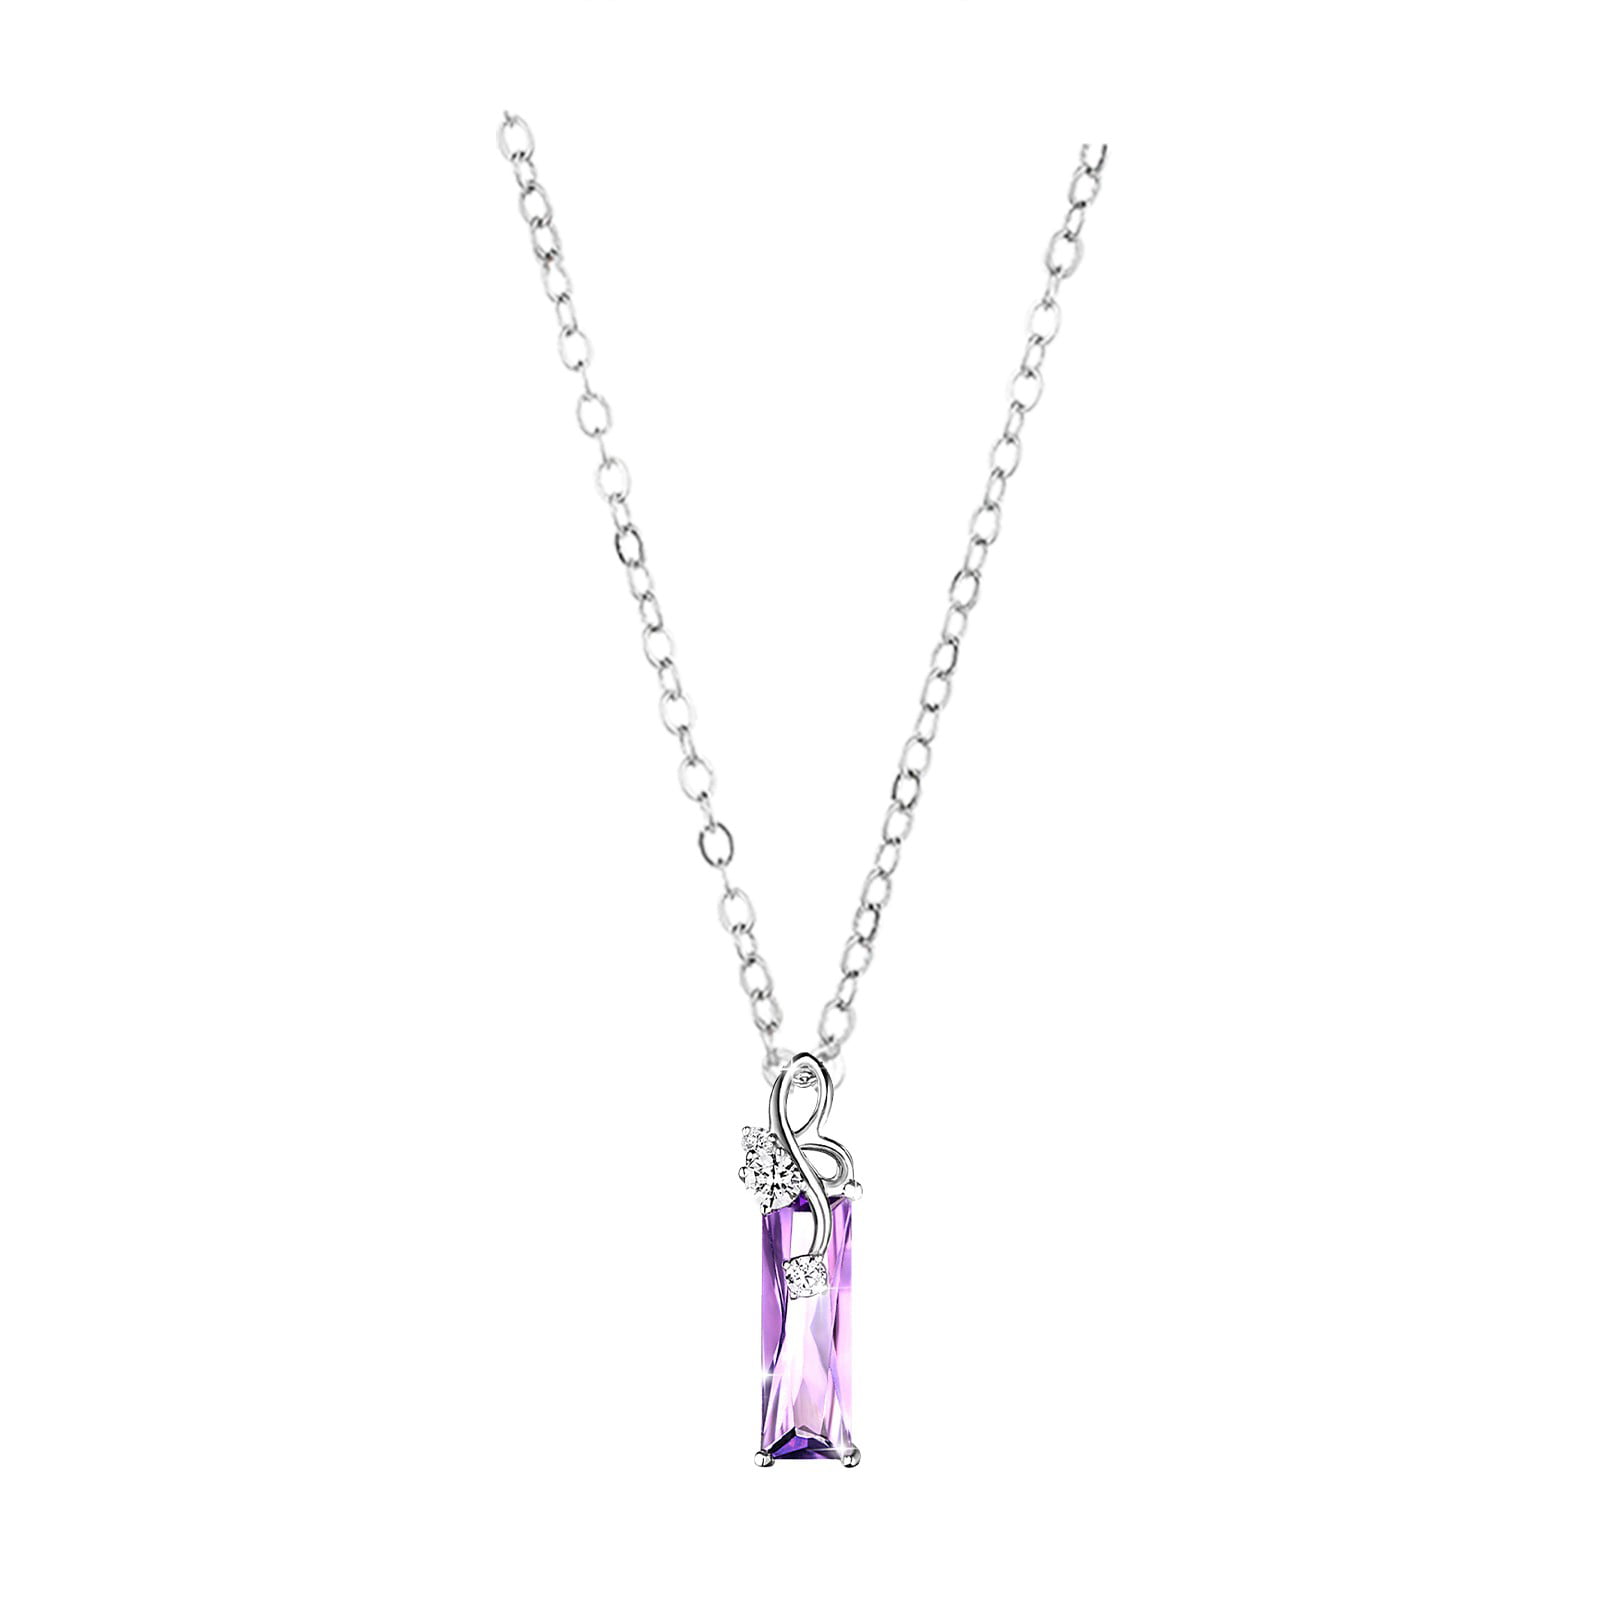 Charms Square Crystal Necklace Female Clavicle Short Chain Valentine's Day Gift 